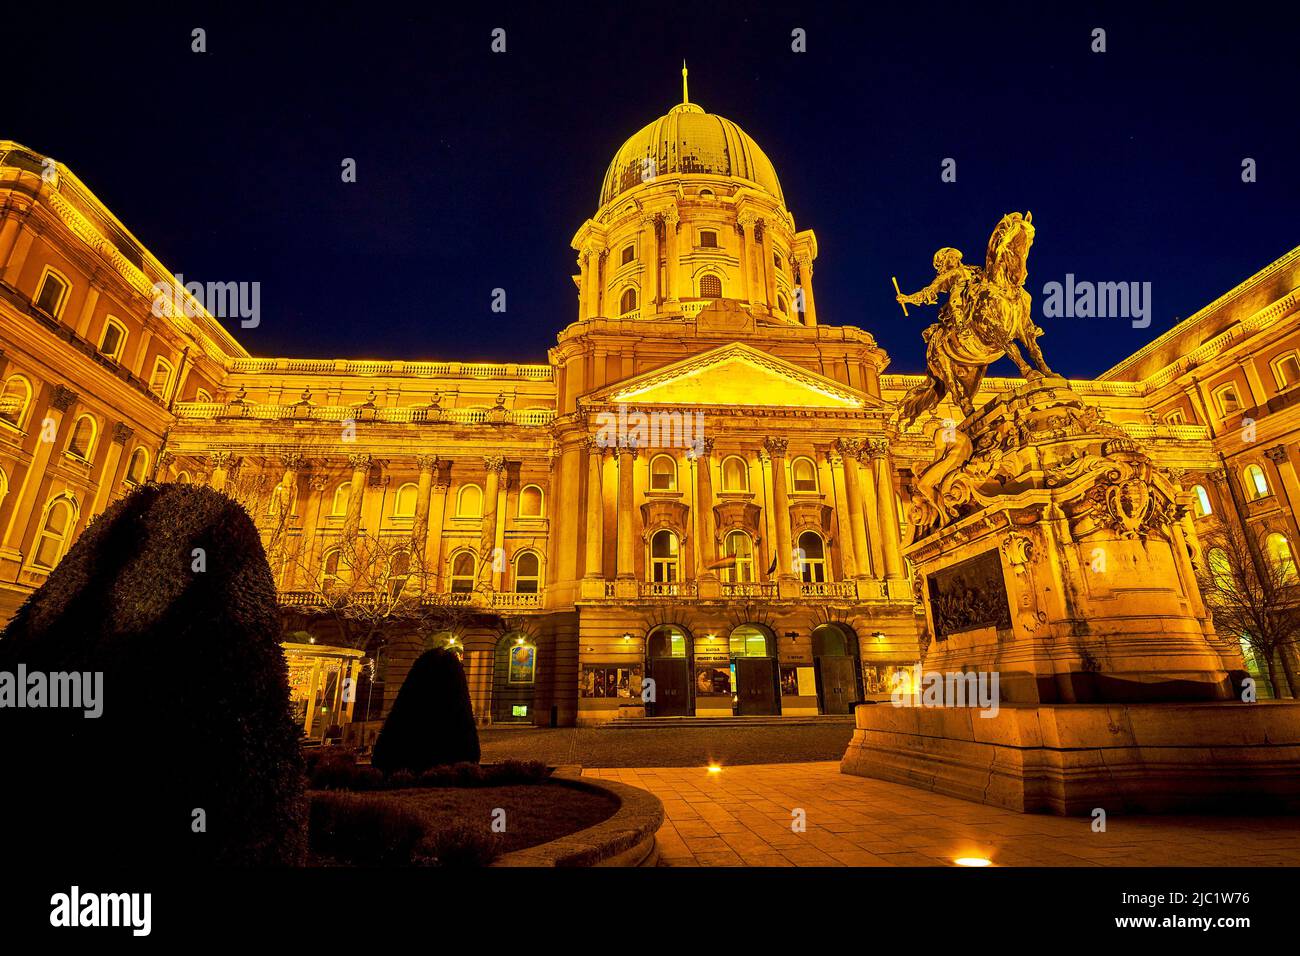 BUDAPEST, HUNGARY - FEBRUARY 23, 2022: The night view on illuminated front facade of Buda Castle with Prince Eugene of Savoy monument, on February 23 Stock Photo